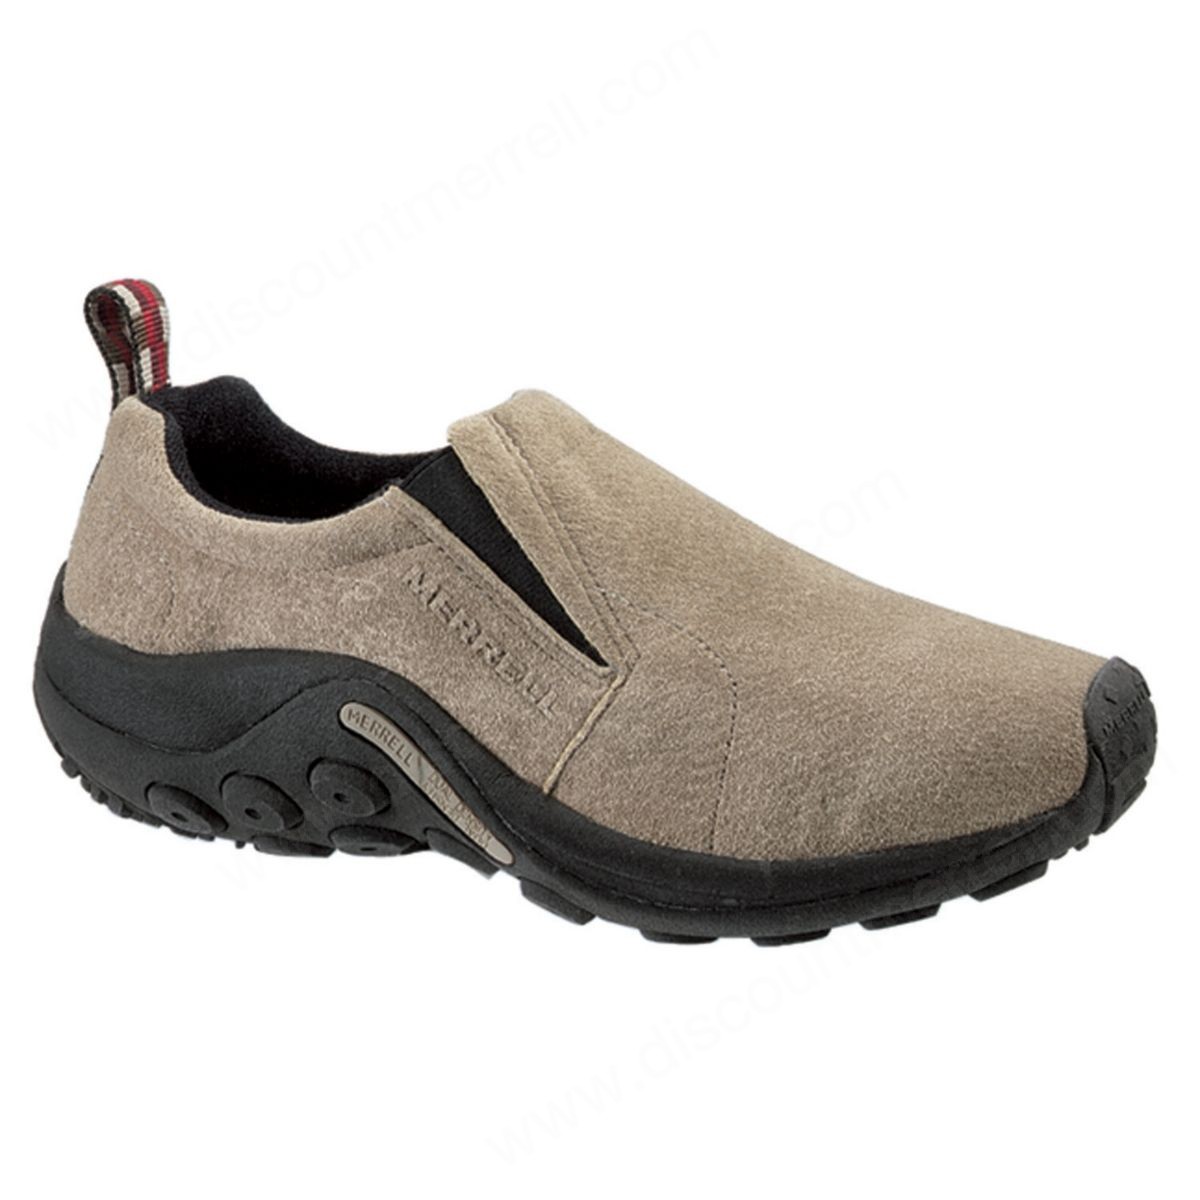 Merrell Woman's Jungle Moc Taupe - Merrell Woman's Jungle Moc Taupe